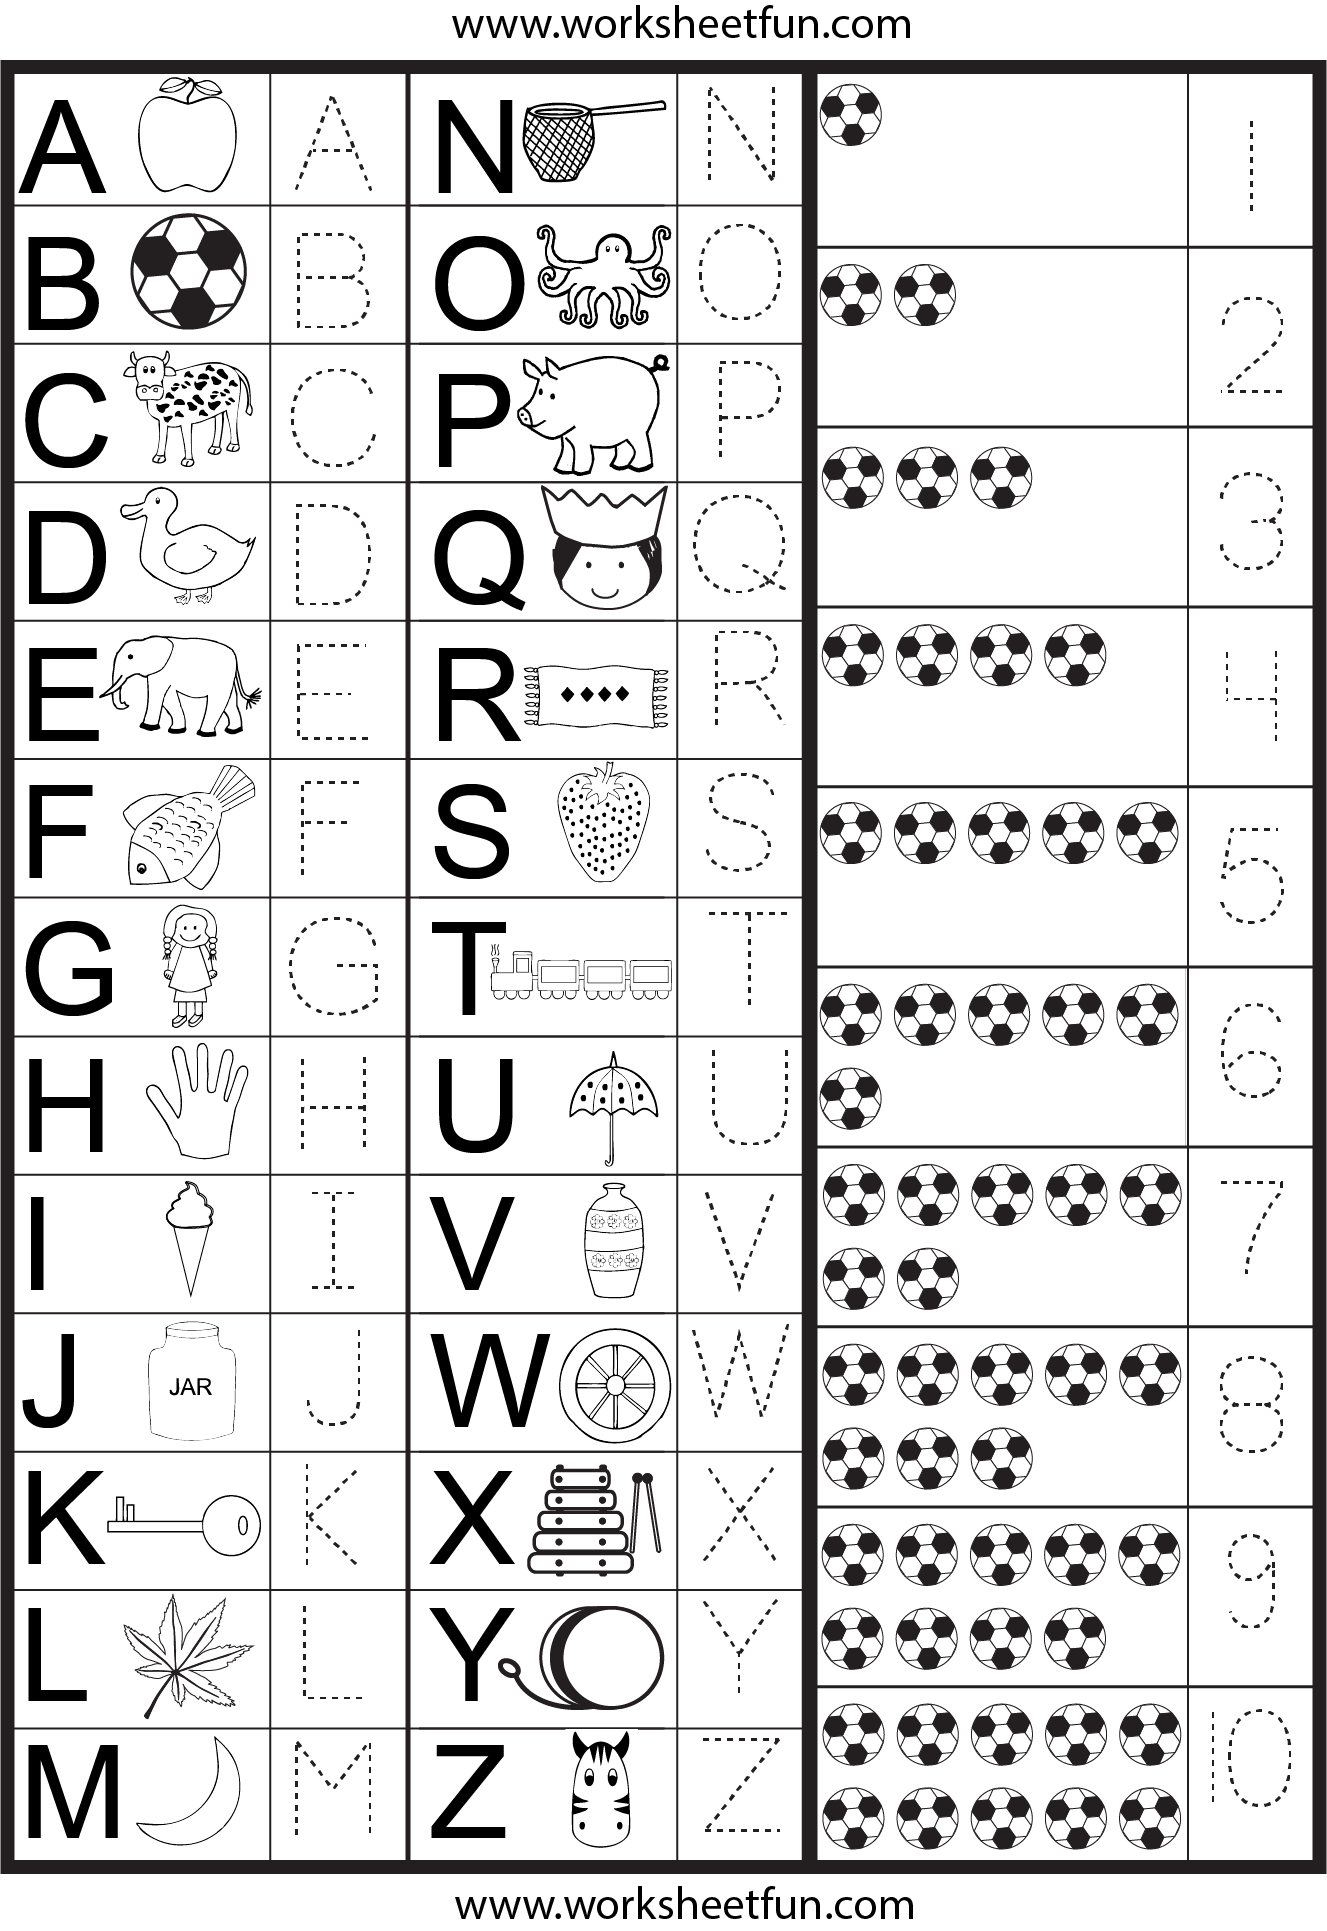 Printable Worksheets To Identify Letters And Numbers